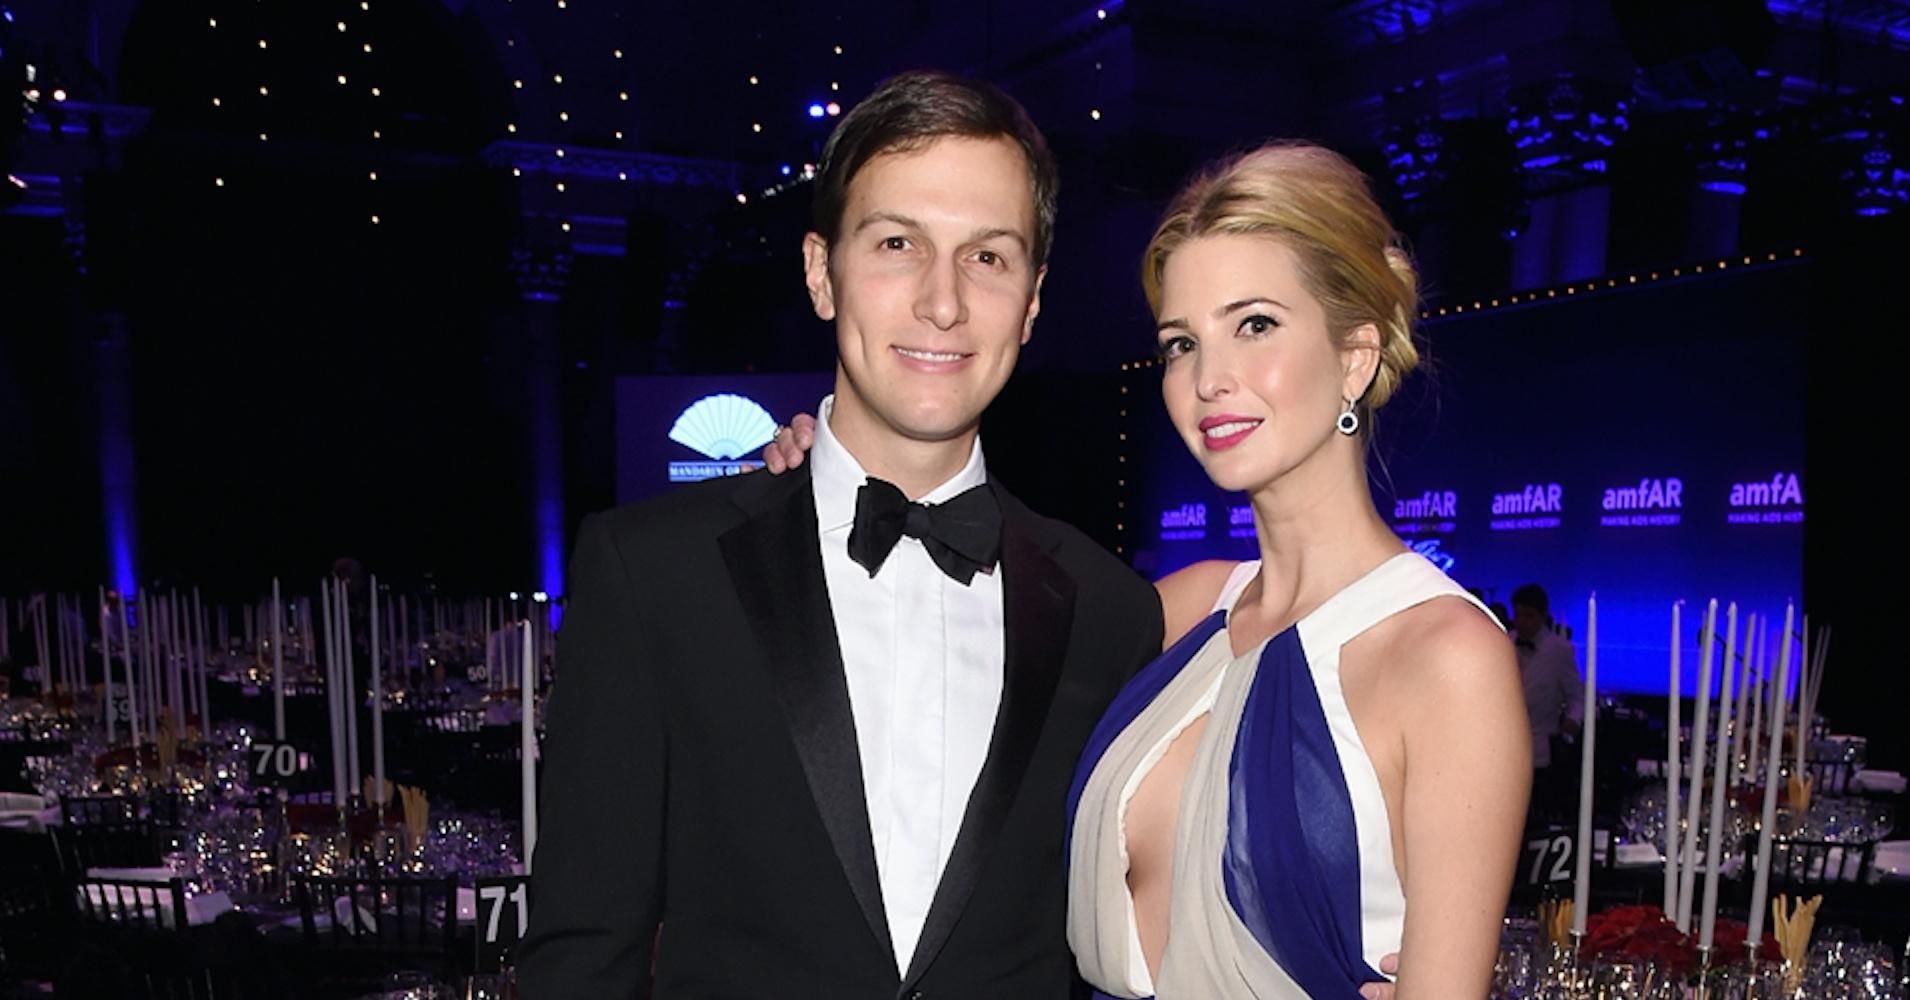 Jared Kushner and his wife Ivanka Trump at a 2015 New York gala. (Photo: Larry Busacca/Getty Images) 